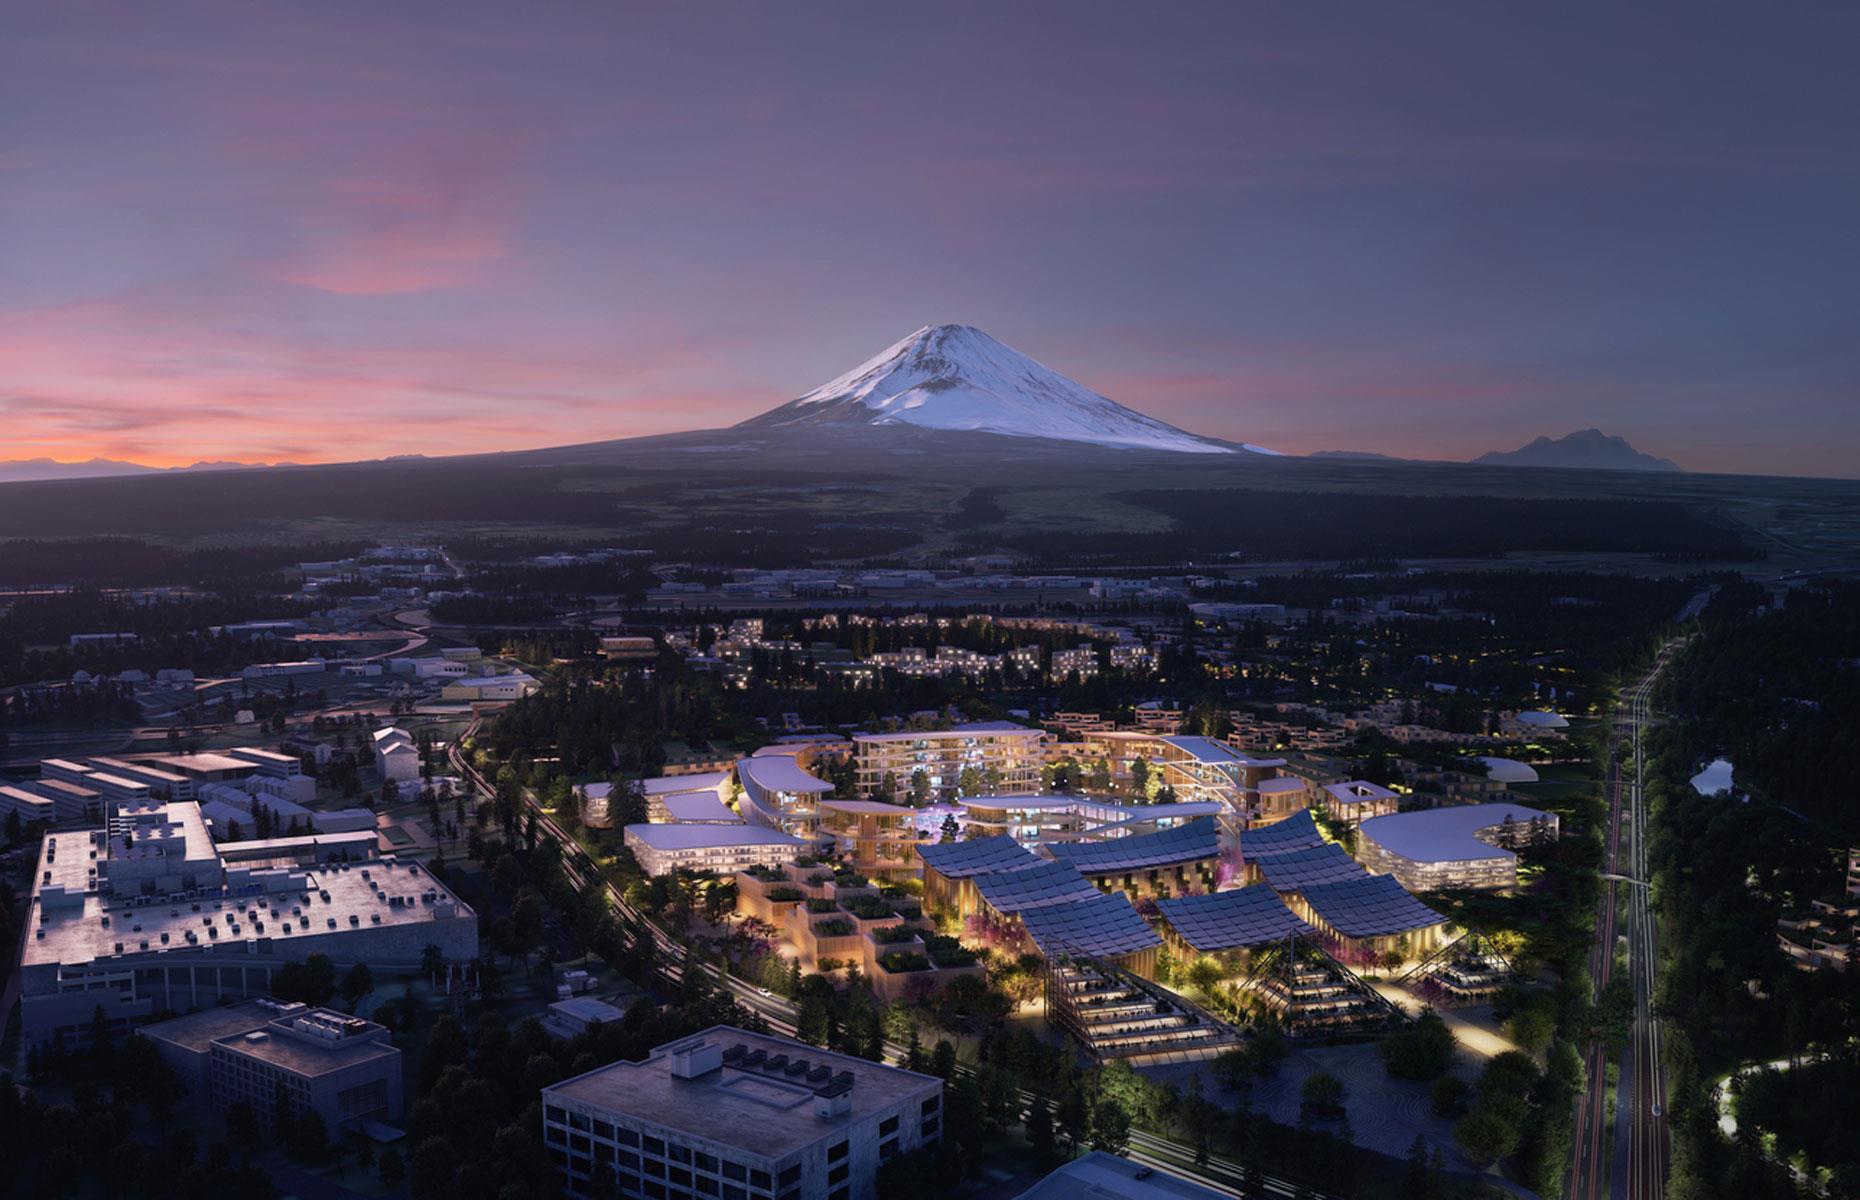 <p>Toyota has teamed up with <a href="https://big.dk/projects/toyota-woven-city-6360">BIG</a> to create a remarkable living laboratory on the site of its old factory in Susono at the base of Mount Fuji. Spanning 175 acres, <a href="https://www.woven-city.global/">Toyota Woven City</a> will eventually have a population of 2,000, including employers of the firm, who will test exciting new forms of mobility, advanced logistics solutions, AI, robots, smart homes and other novel technologies across 12 categories in a real-world environment.</p>